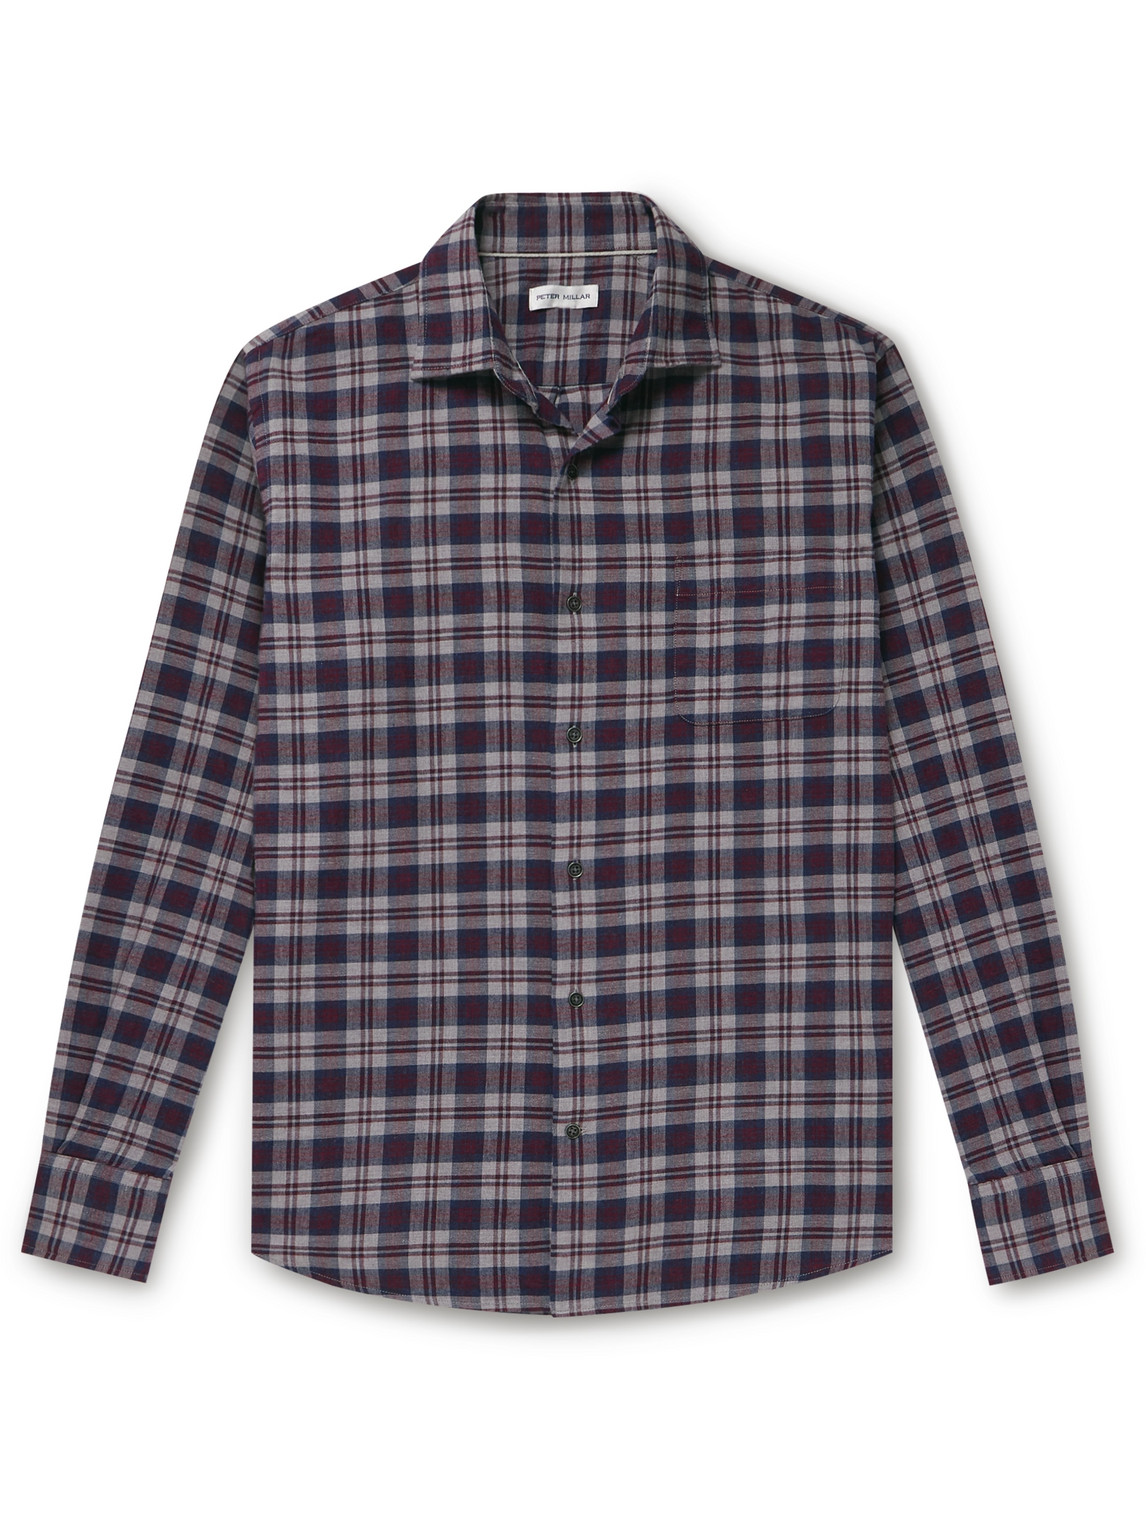 PETER MILLAR MAYWOOD CHECKED COTTON-FLANNEL SHIRT